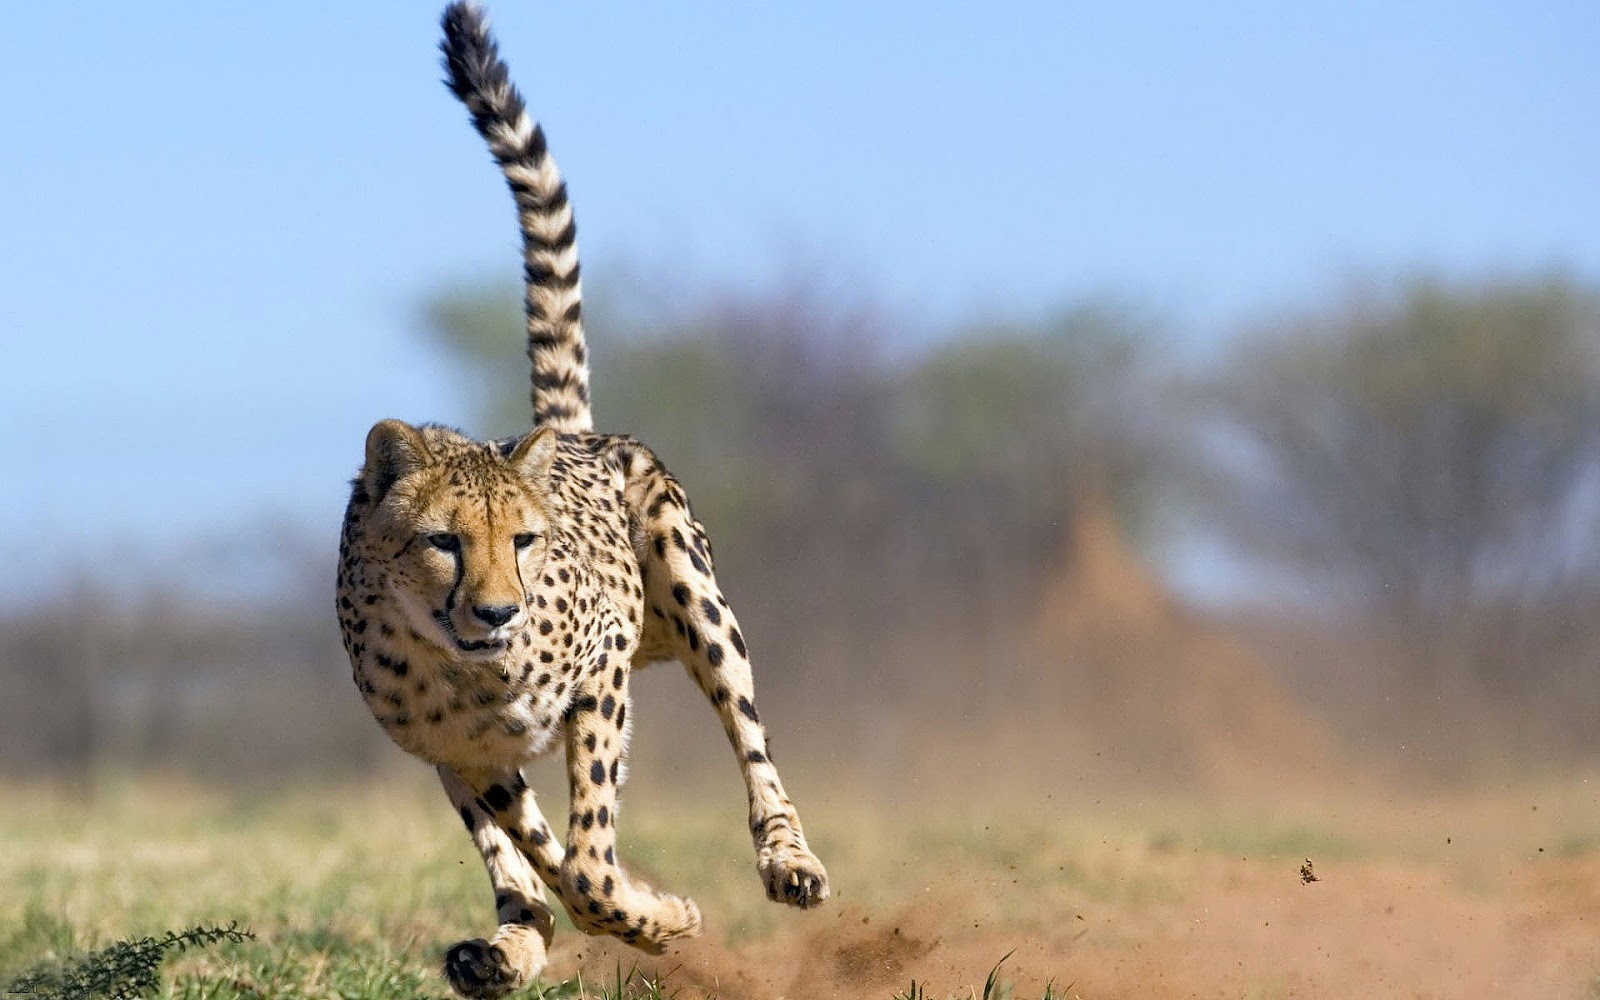 HD Cheetah Wallpaper With A Fast Running Attacking